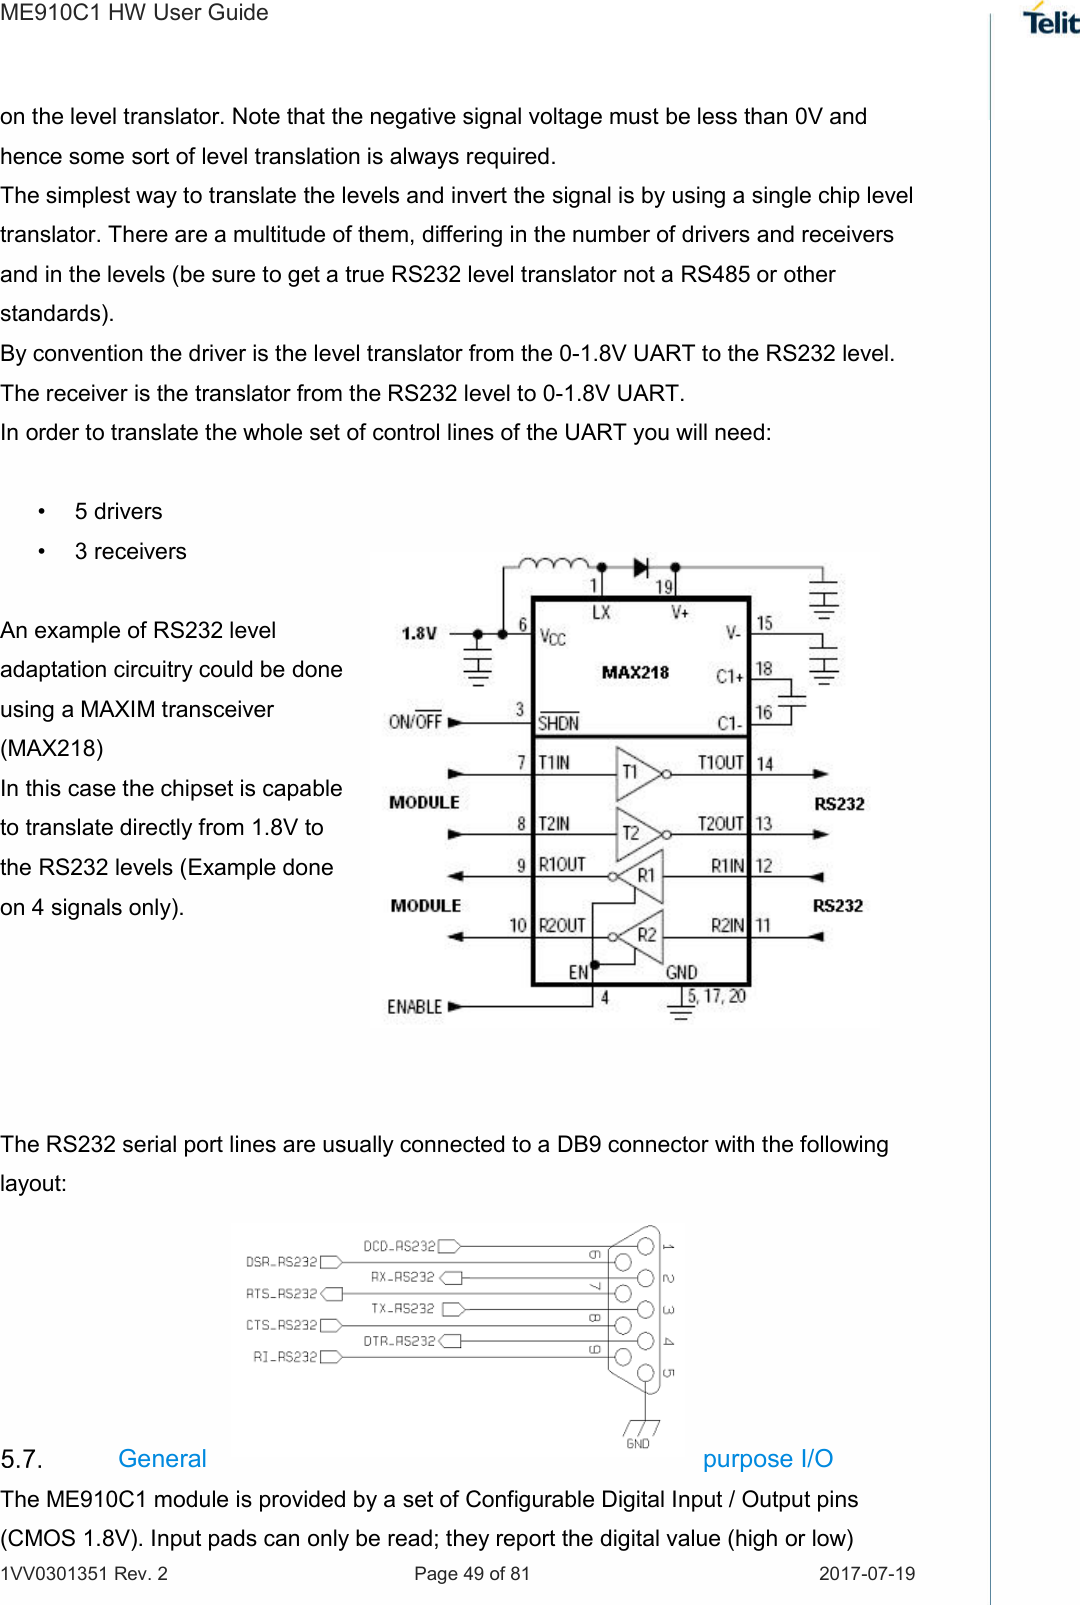 ME910C1 HW User Guide 1VV0301351 Rev. 2  Page 49 of 81  2017-07-19  on the level translator. Note that the negative signal voltage must be less than 0V and hence some sort of level translation is always required.  The simplest way to translate the levels and invert the signal is by using a single chip level translator. There are a multitude of them, differing in the number of drivers and receivers and in the levels (be sure to get a true RS232 level translator not a RS485 or other standards). By convention the driver is the level translator from the 0-1.8V UART to the RS232 level. The receiver is the translator from the RS232 level to 0-1.8V UART. In order to translate the whole set of control lines of the UART you will need:  •  5 drivers •  3 receivers  An example of RS232 level adaptation circuitry could be done using a MAXIM transceiver (MAX218)  In this case the chipset is capable to translate directly from 1.8V to the RS232 levels (Example done on 4 signals only).      The RS232 serial port lines are usually connected to a DB9 connector with the following layout:       General  purpose I/O  The ME910C1 module is provided by a set of Configurable Digital Input / Output pins (CMOS 1.8V). Input pads can only be read; they report the digital value (high or low) 